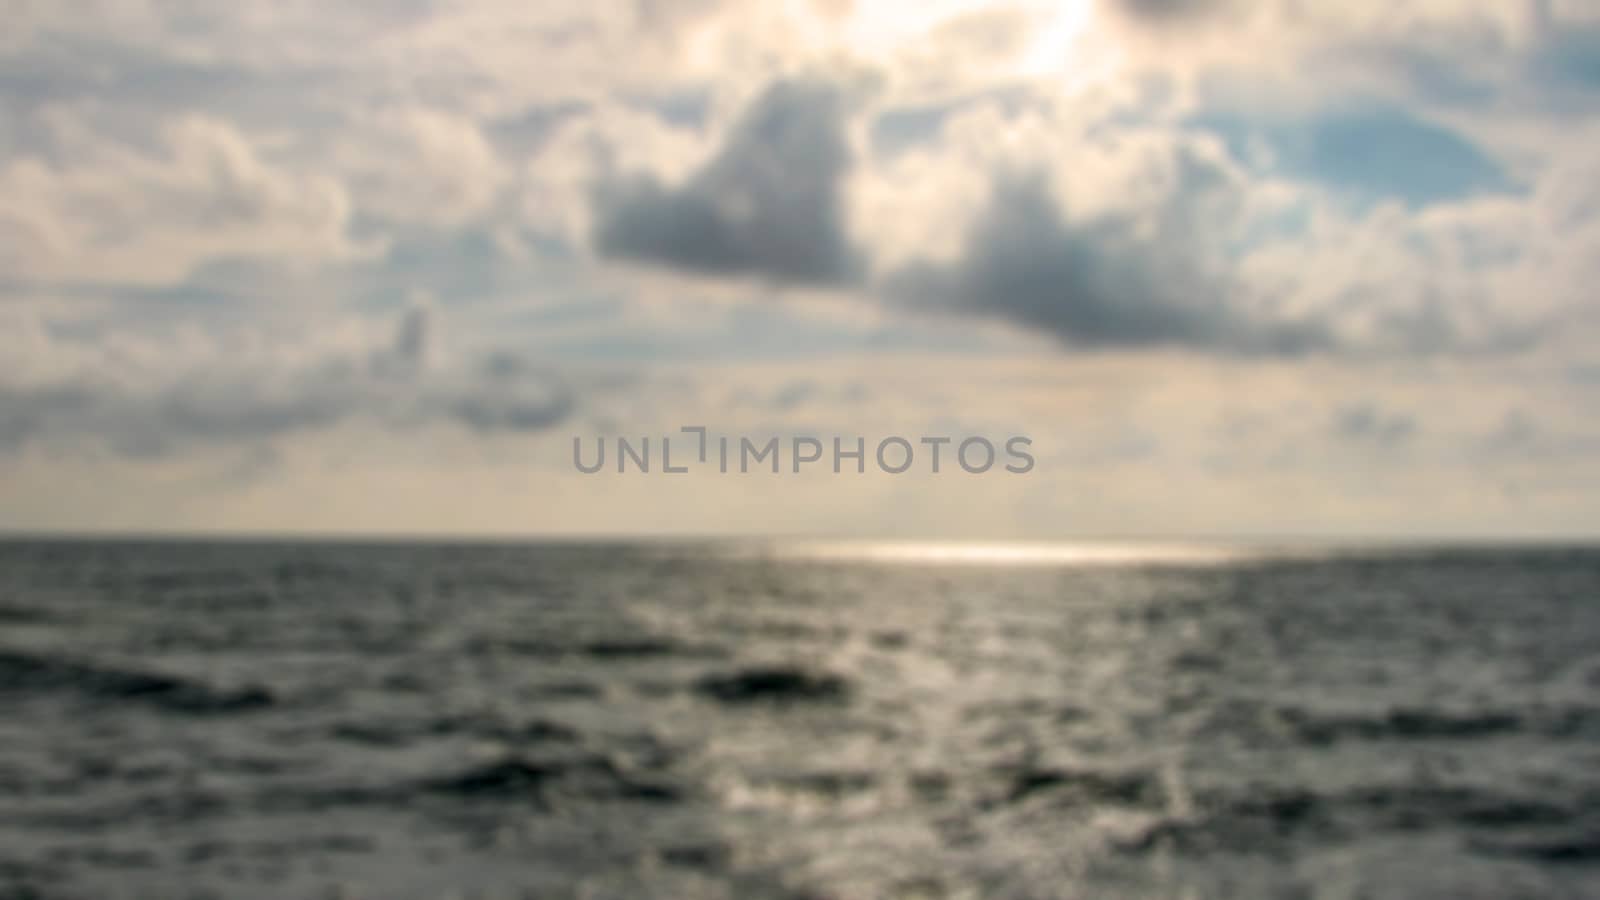 Abstract blur sea landscape. Creative idea for background, screensaver or panel. Can be used for decoration purposes.